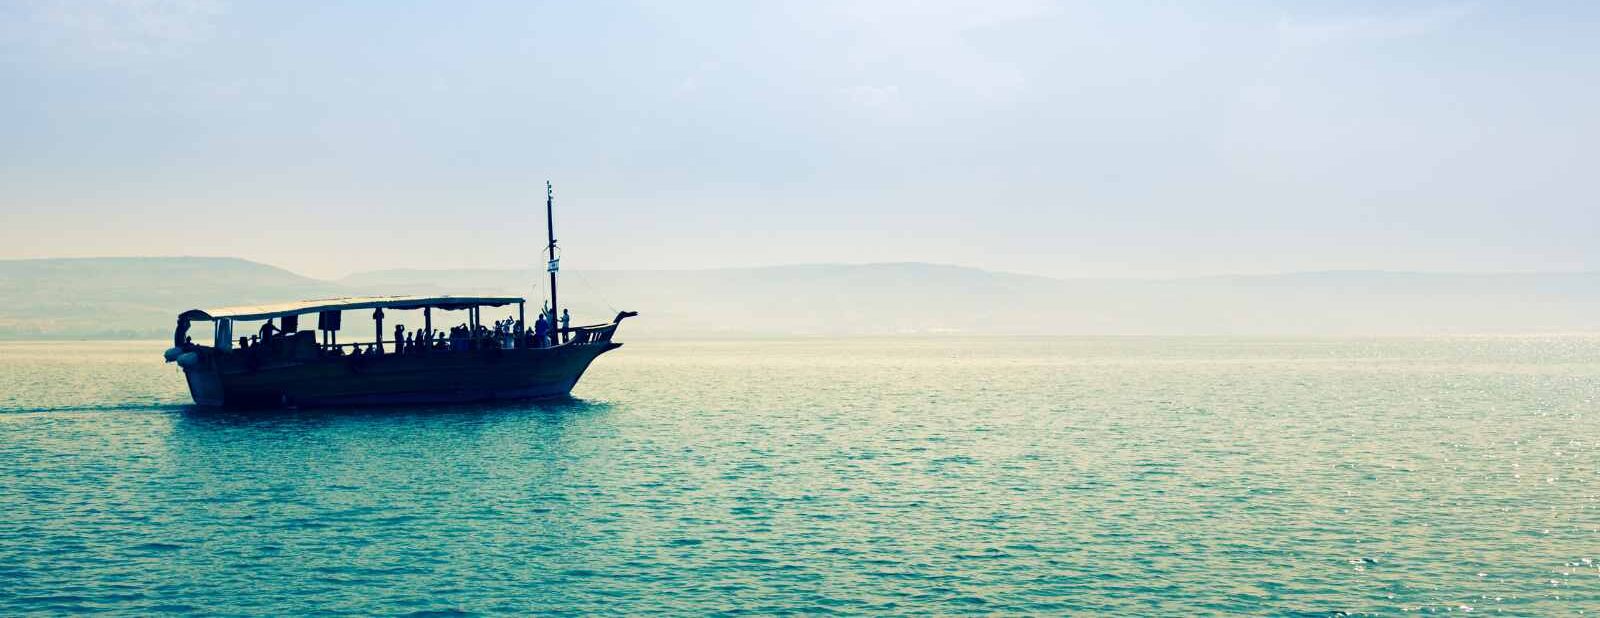 Sea of Galilee - boat on the water